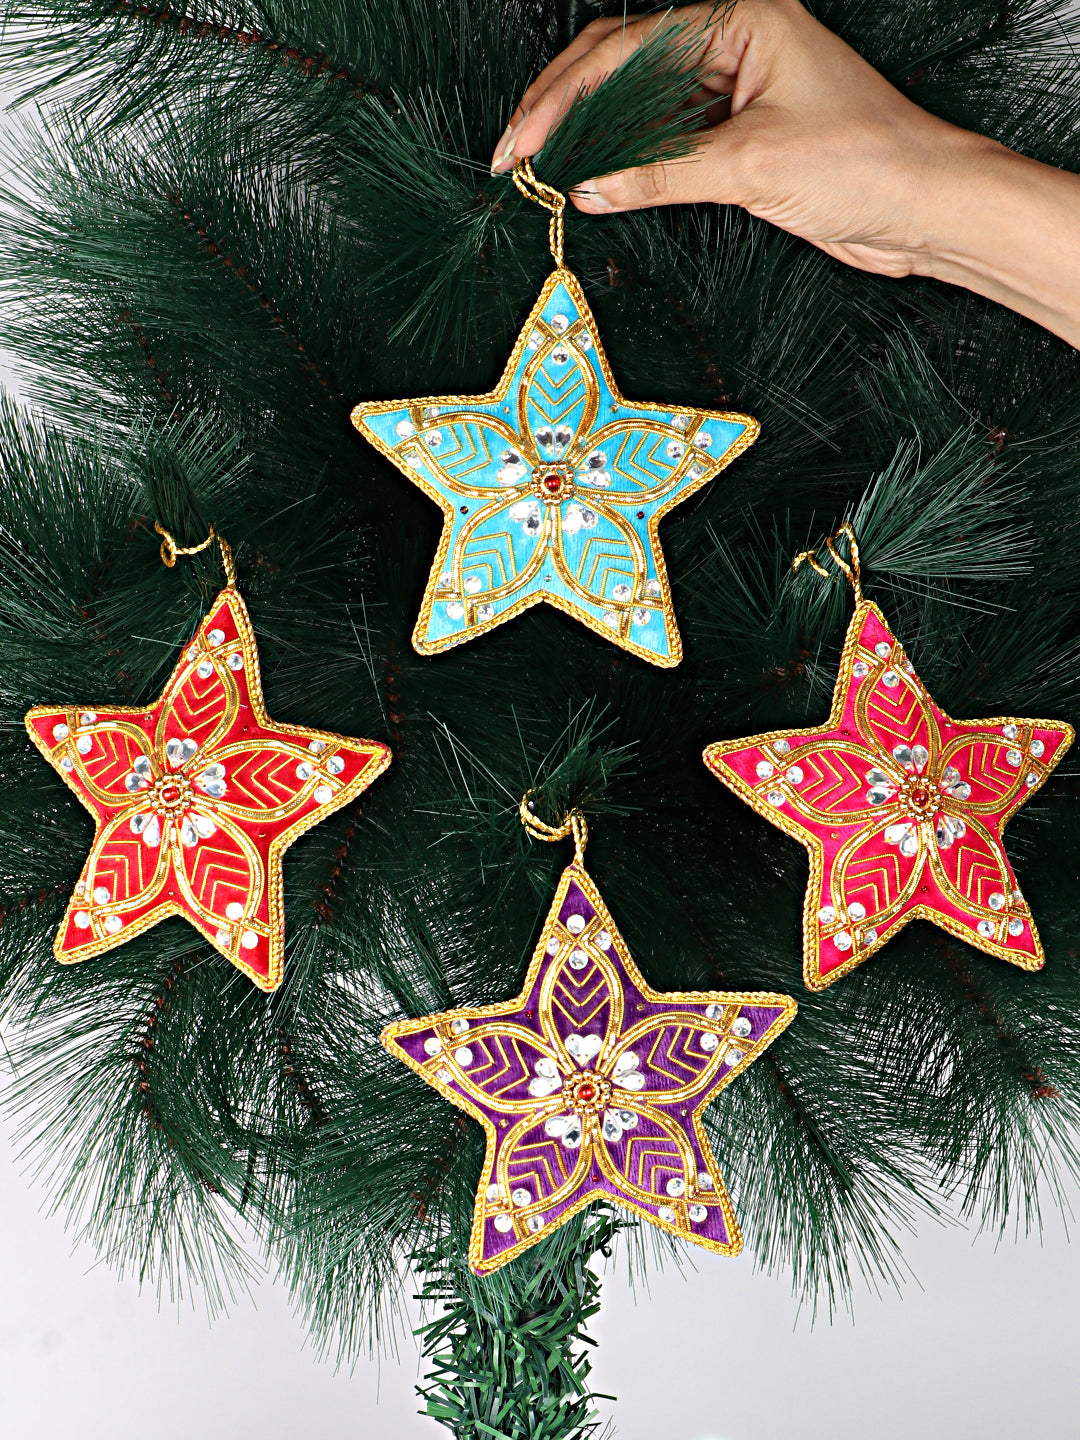 Cheerful Stars Christmas ornaments set of 4 pieces for holiday decor (1SET=4PC)